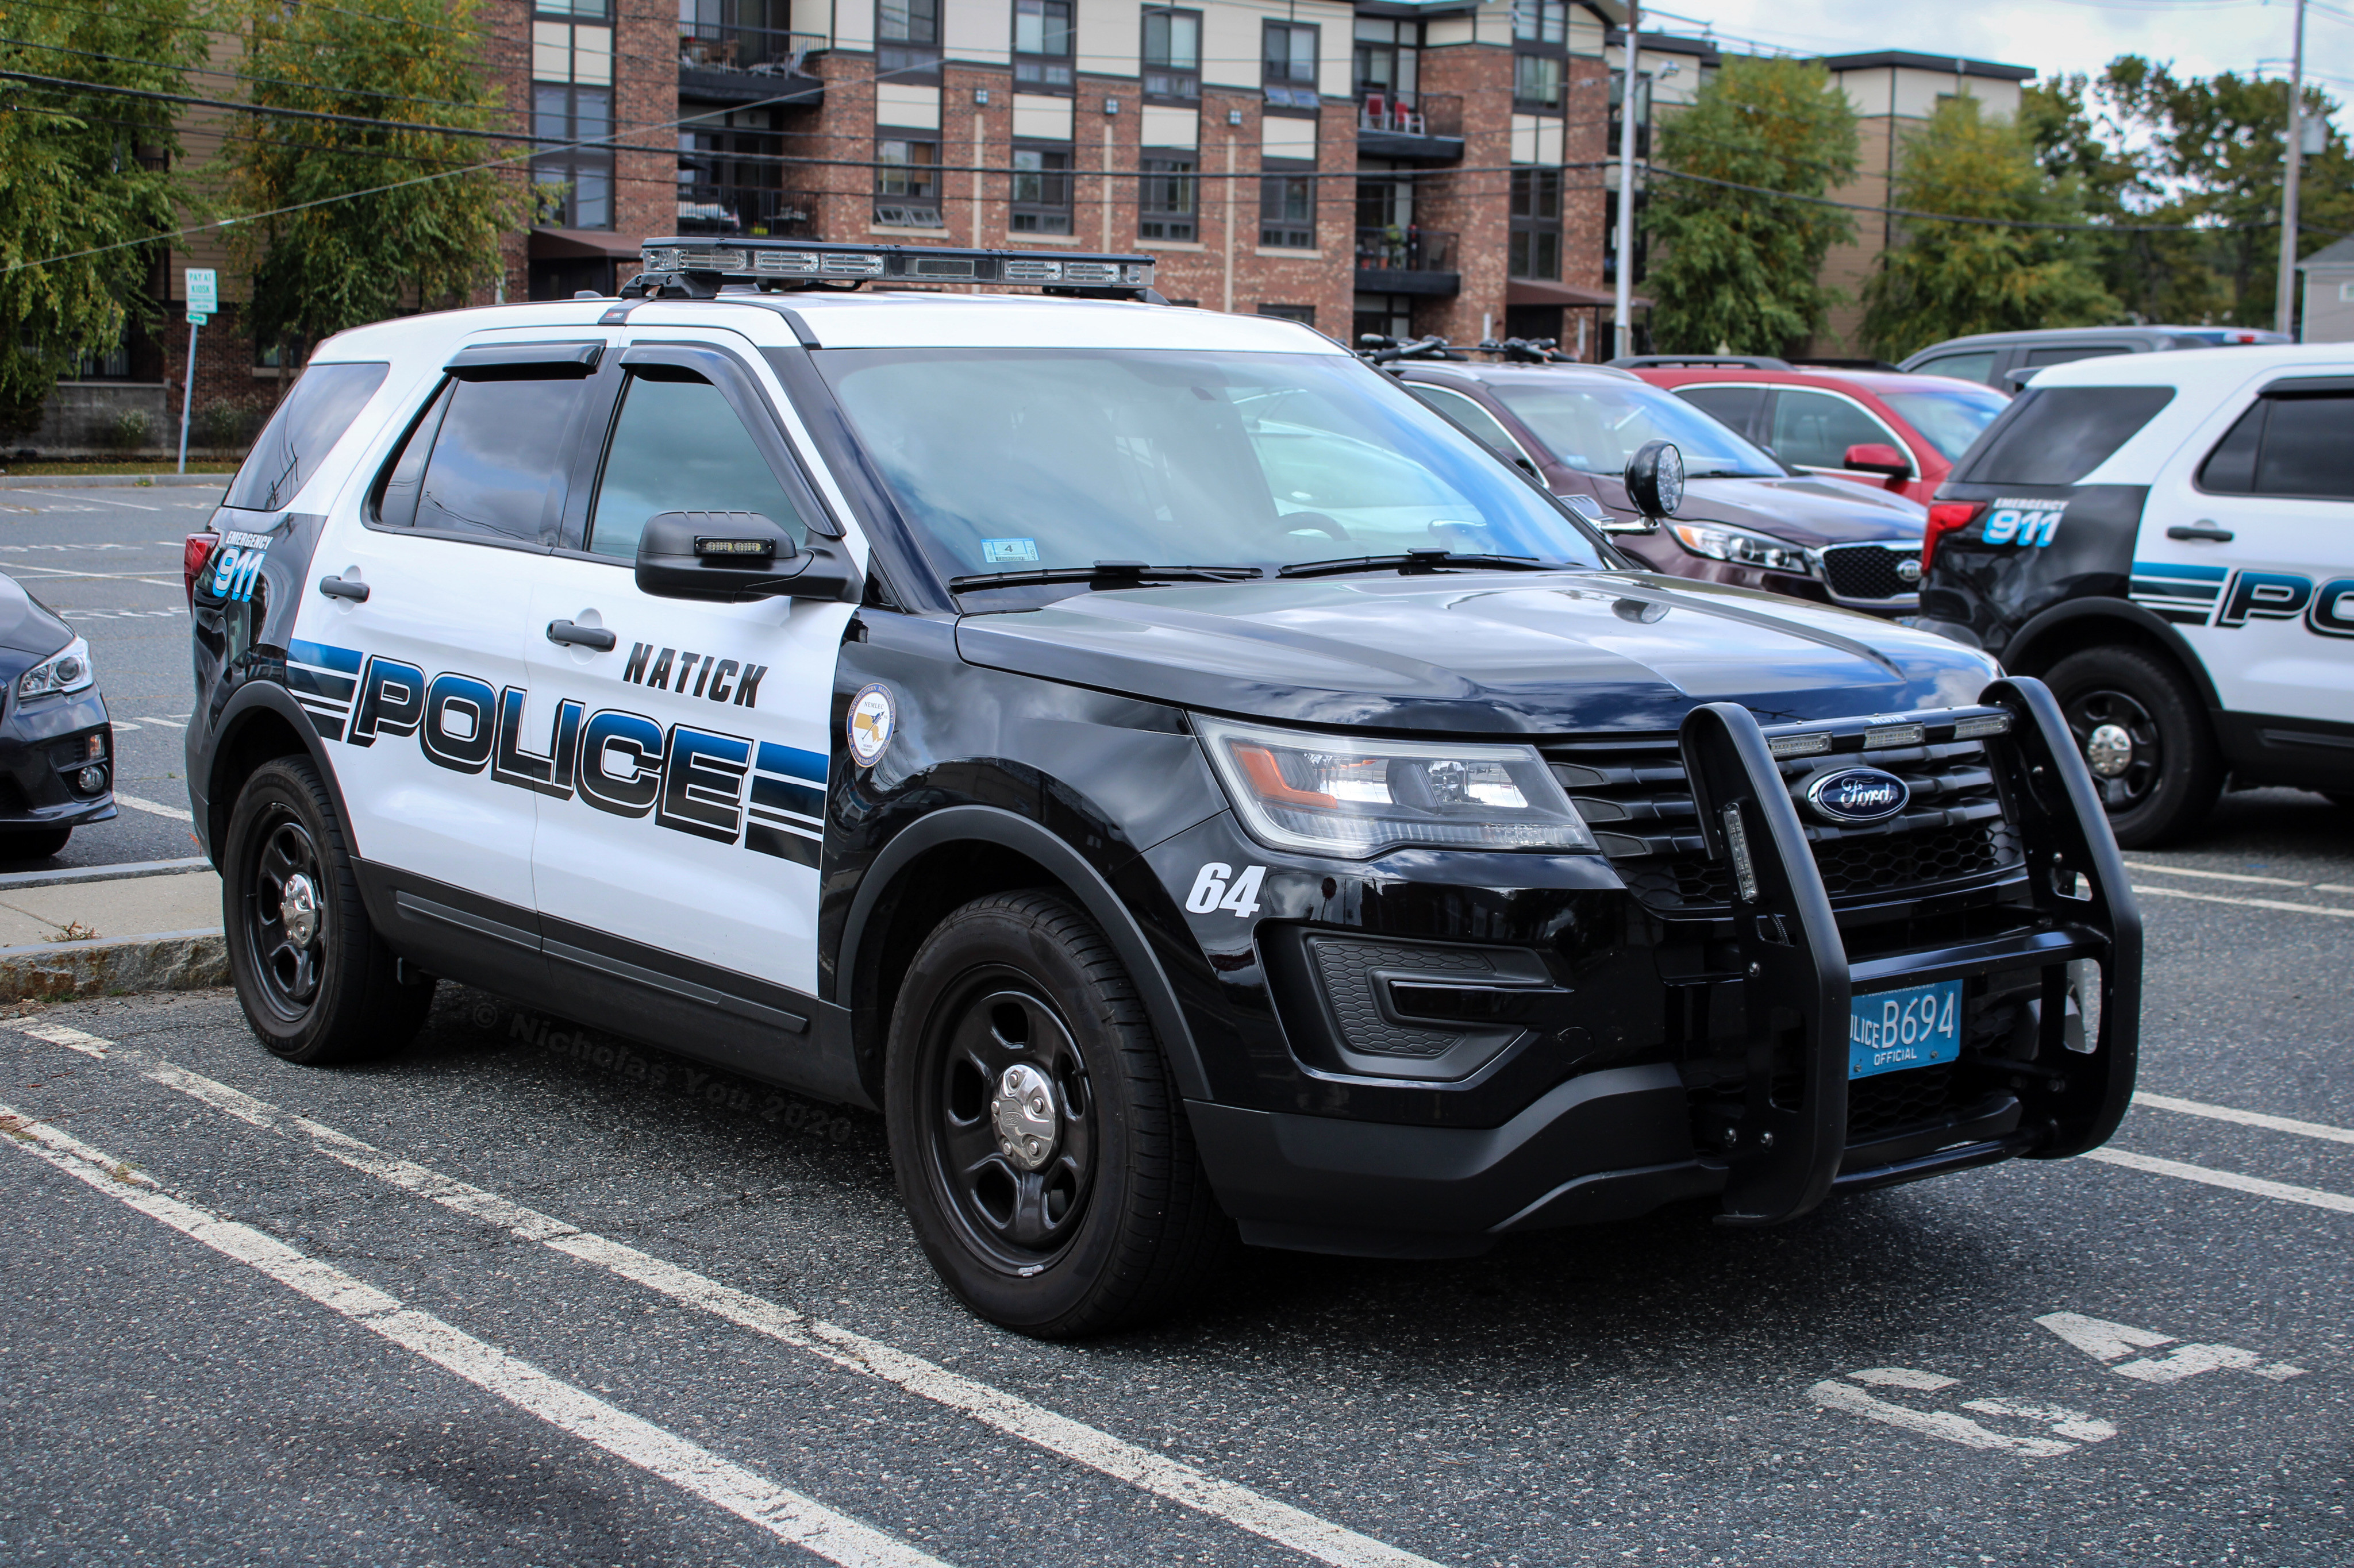 A photo  of Natick Police
            Cruiser 64, a 2016-2019 Ford Police Interceptor Utility             taken by Nicholas You